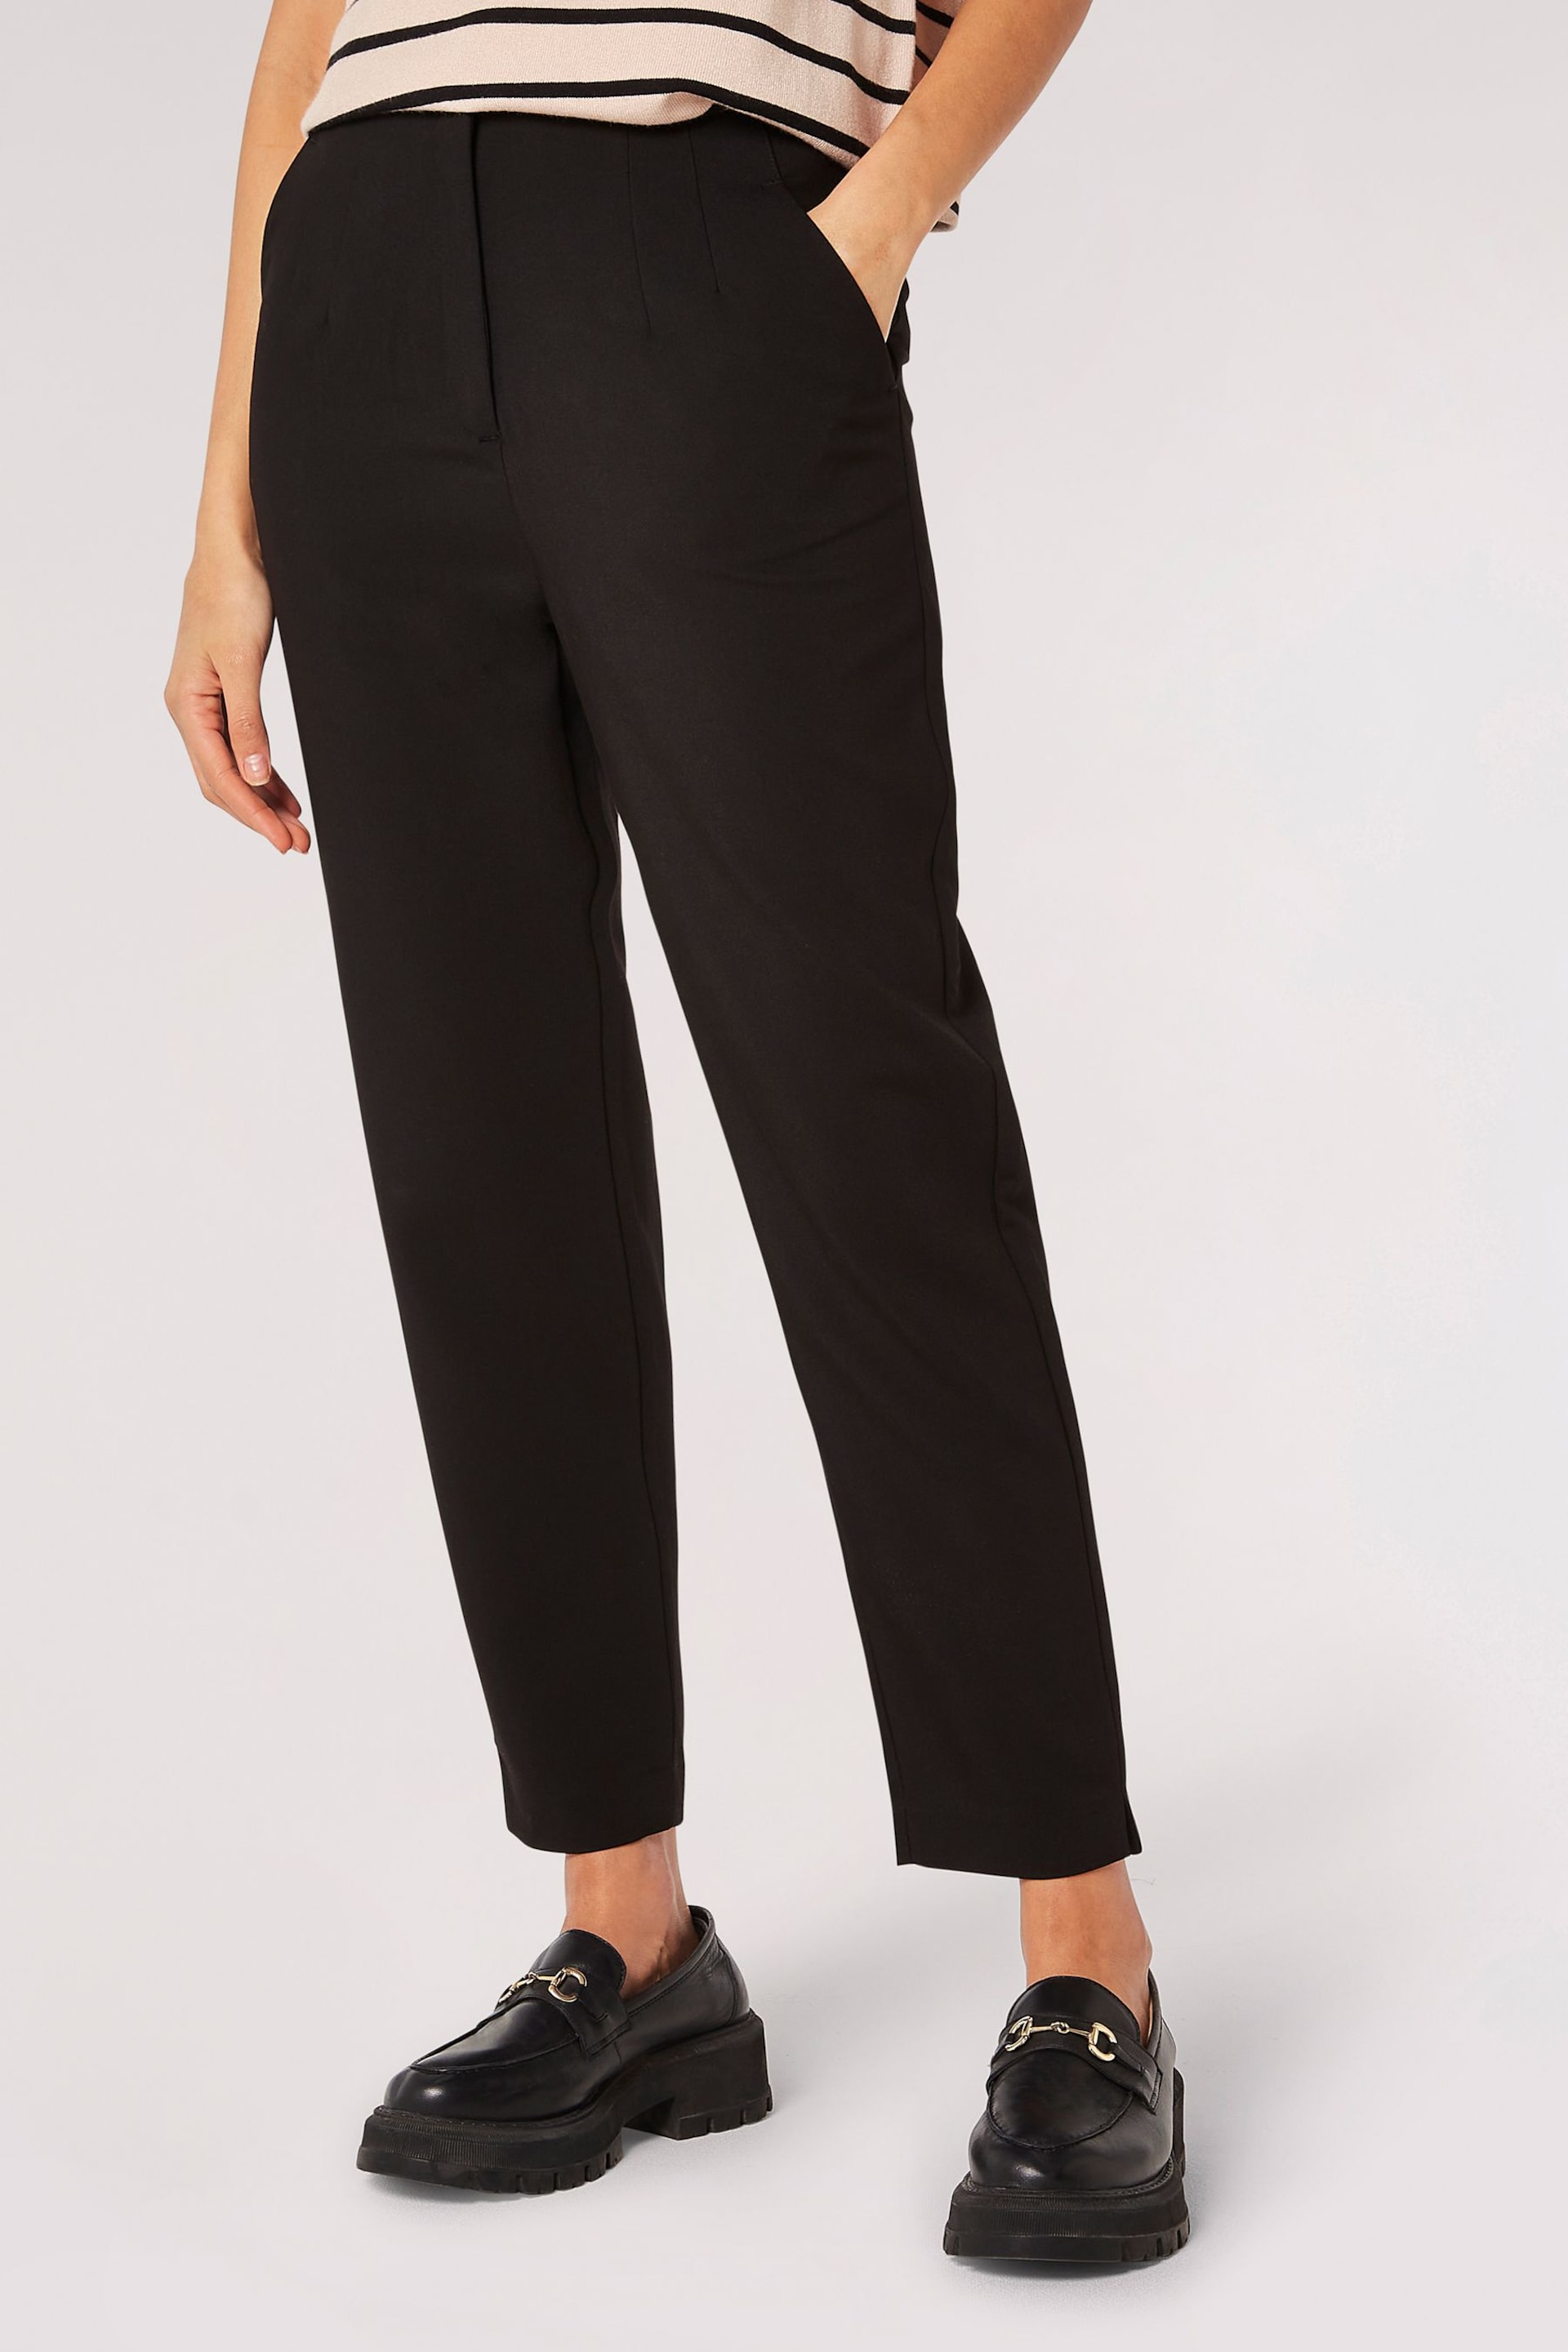 Apricot Black Pintuck Cigarette Trousers - Image 1 of 4